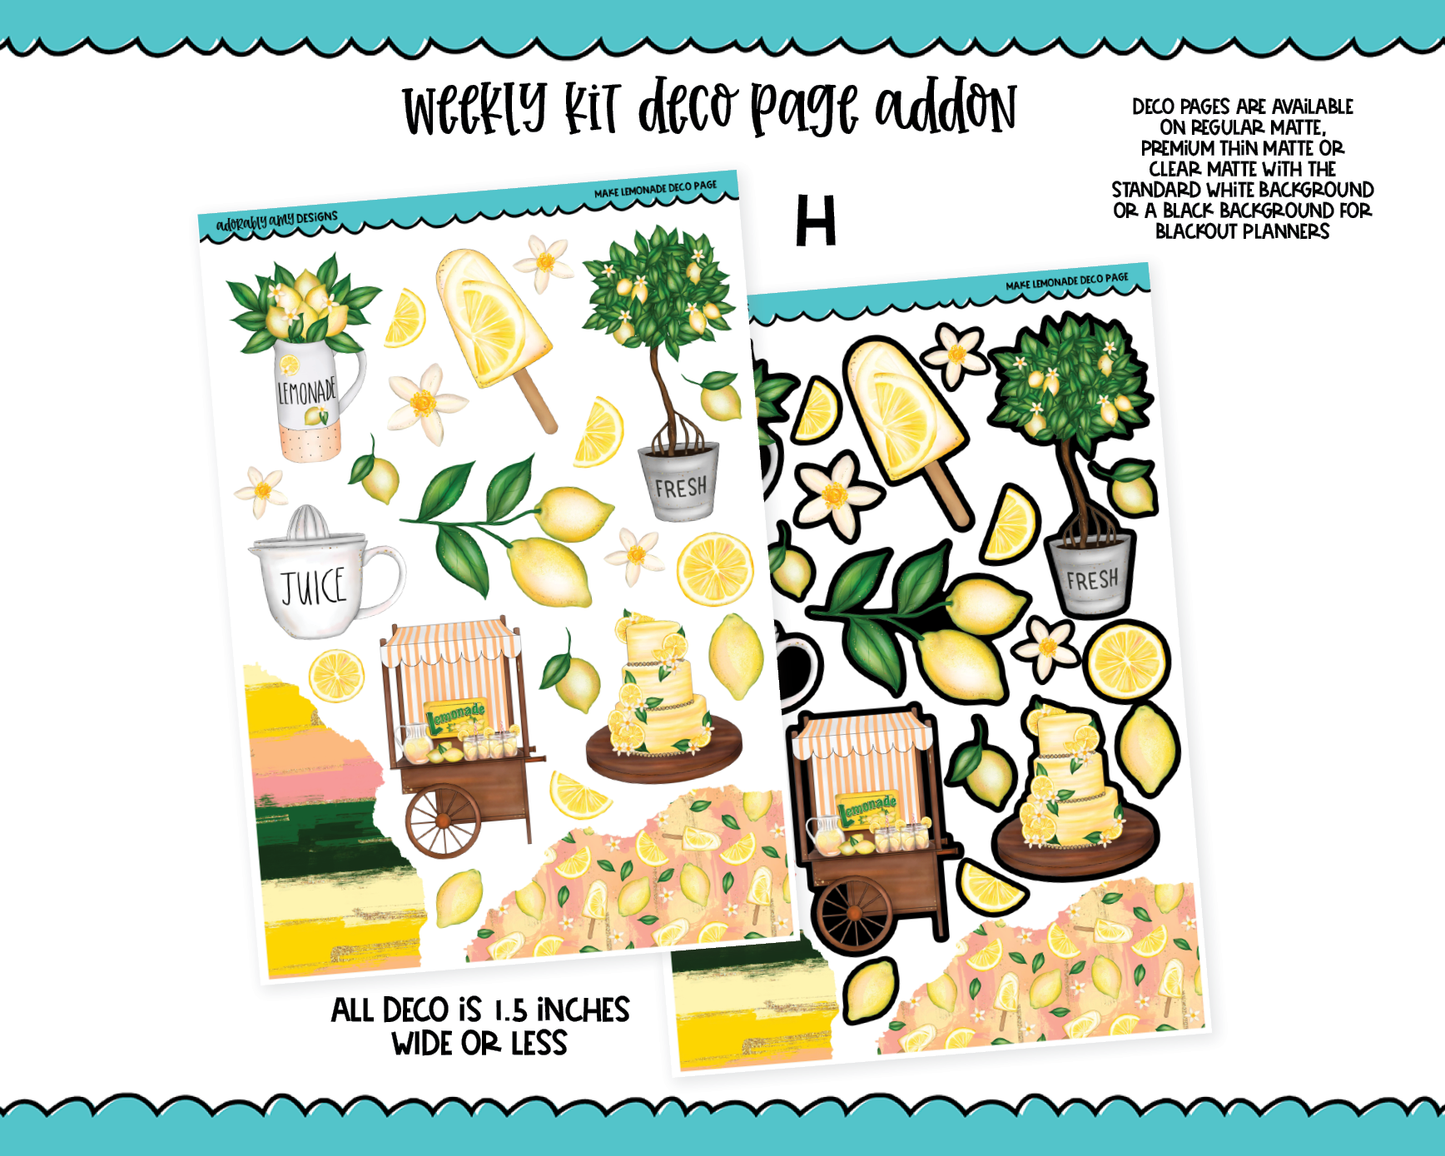 Make Lemonade Weekly Kit Addons - All Sizes - Deco, Smears and More!